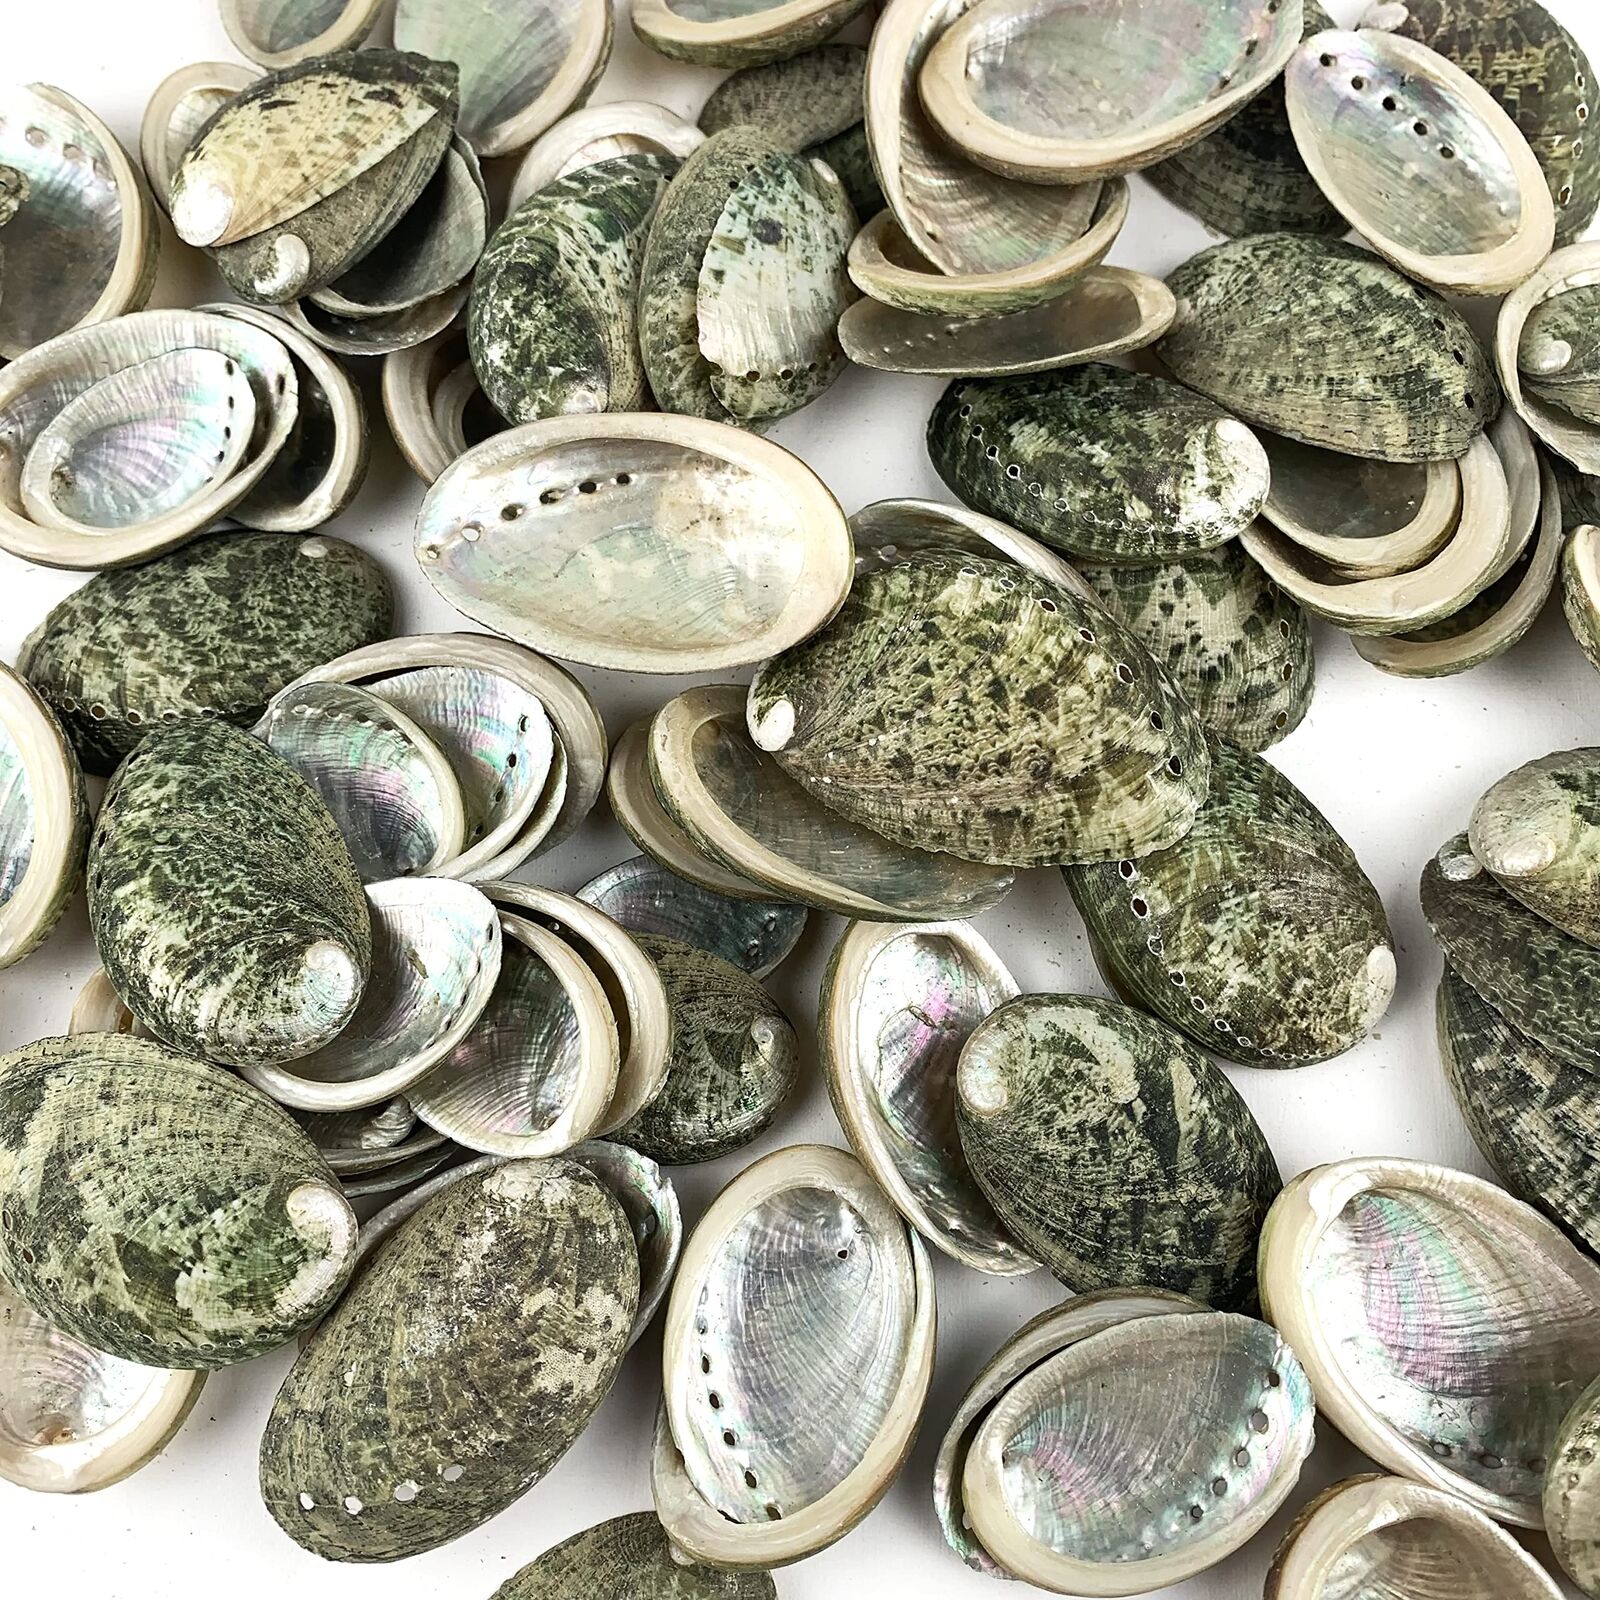 100PC Natural Green Round Donkey Ear Abalone Shell,Abalone Seashells for Craf...